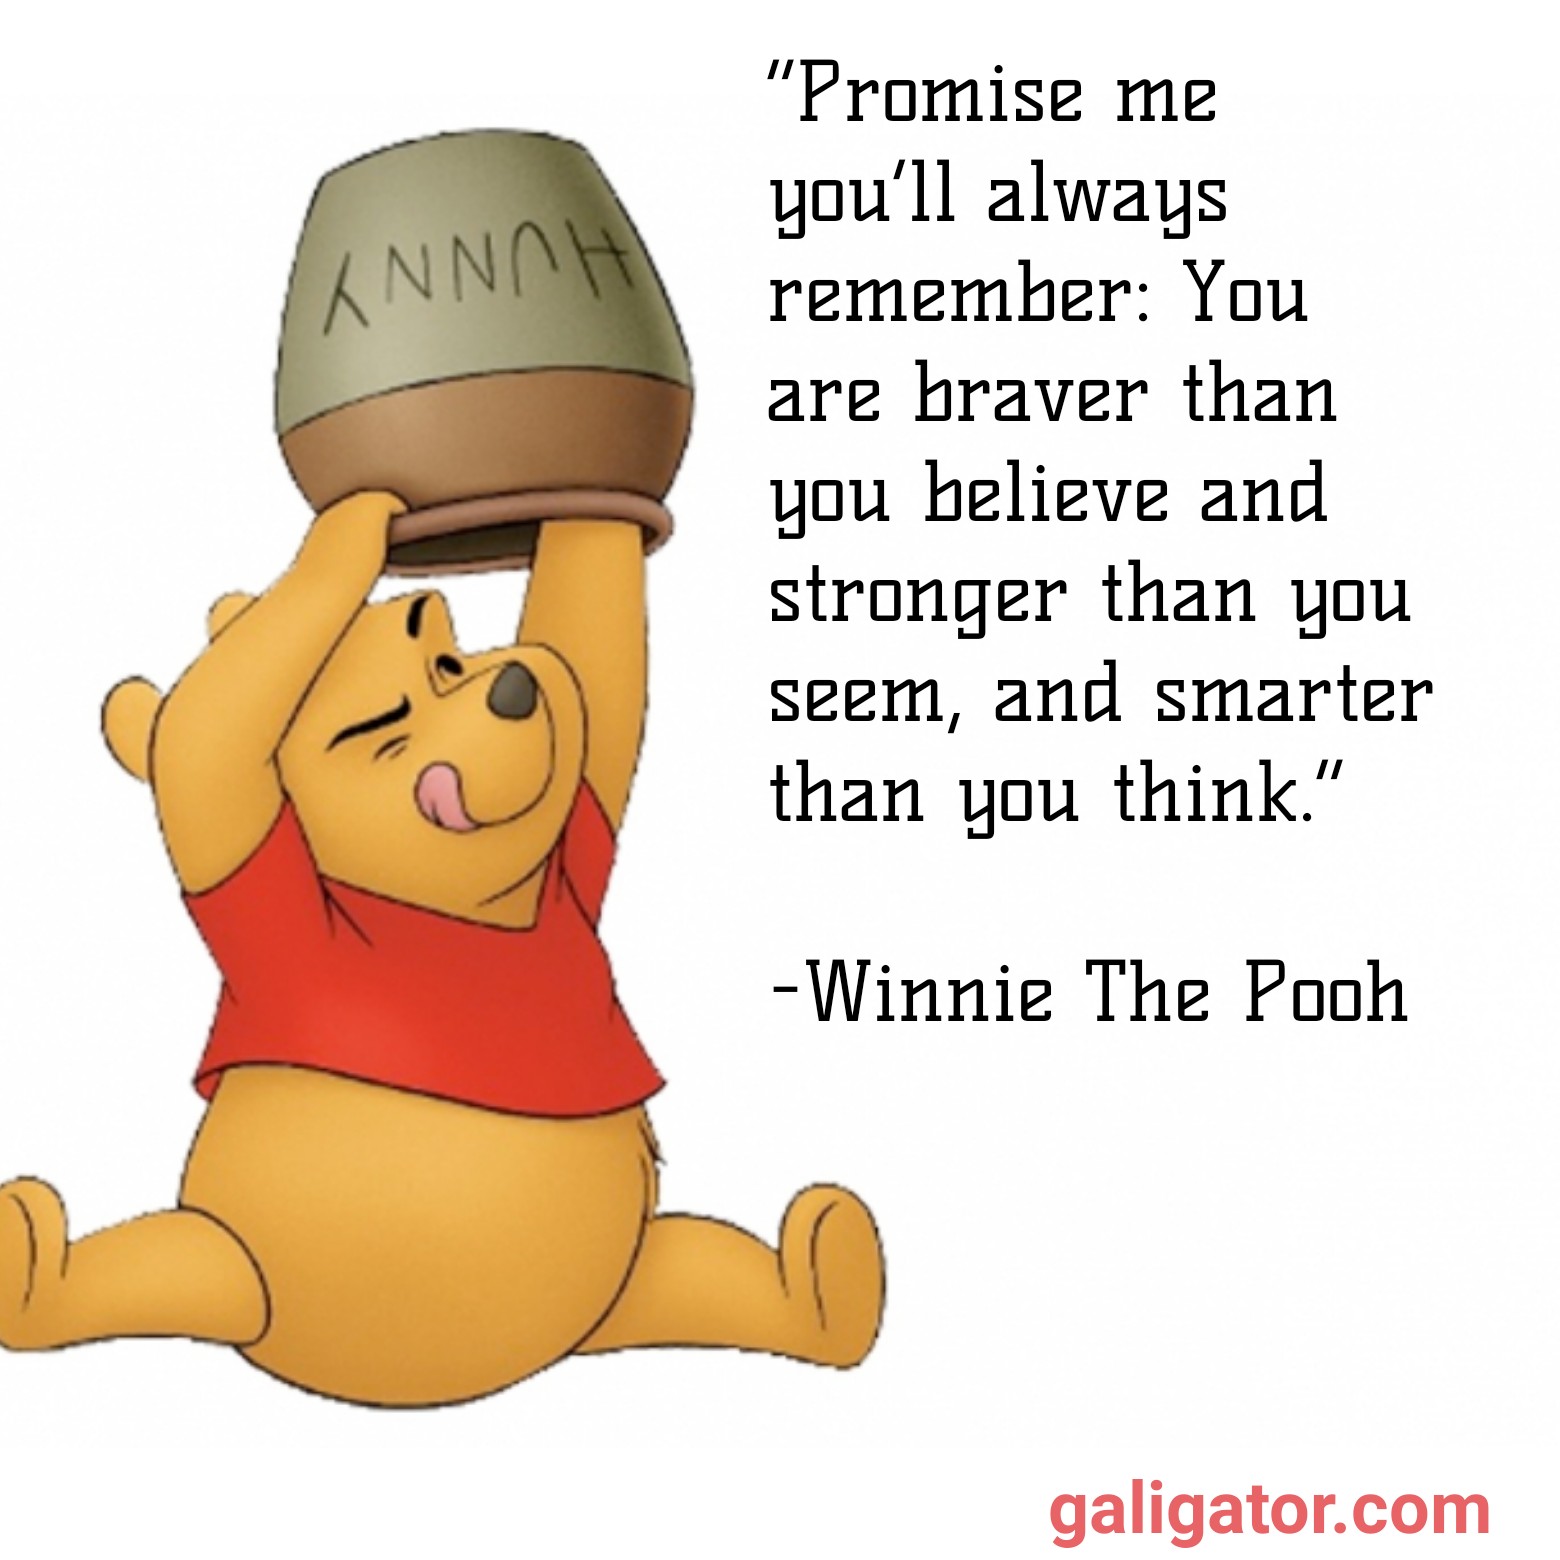 winnie the pooh quotes, winnie the pooh friendship quotes , winnie the pooh love quotes , inspirational winnie the pooh quotes , winnie the pooh birthday quotes , winnie the pooh blustery day quote, winnie the pooh birthday quotes, winnie the pooh quotes funny, winnie the pooh graduation quotes, winnie the pooh quotes they say nothing is impossible